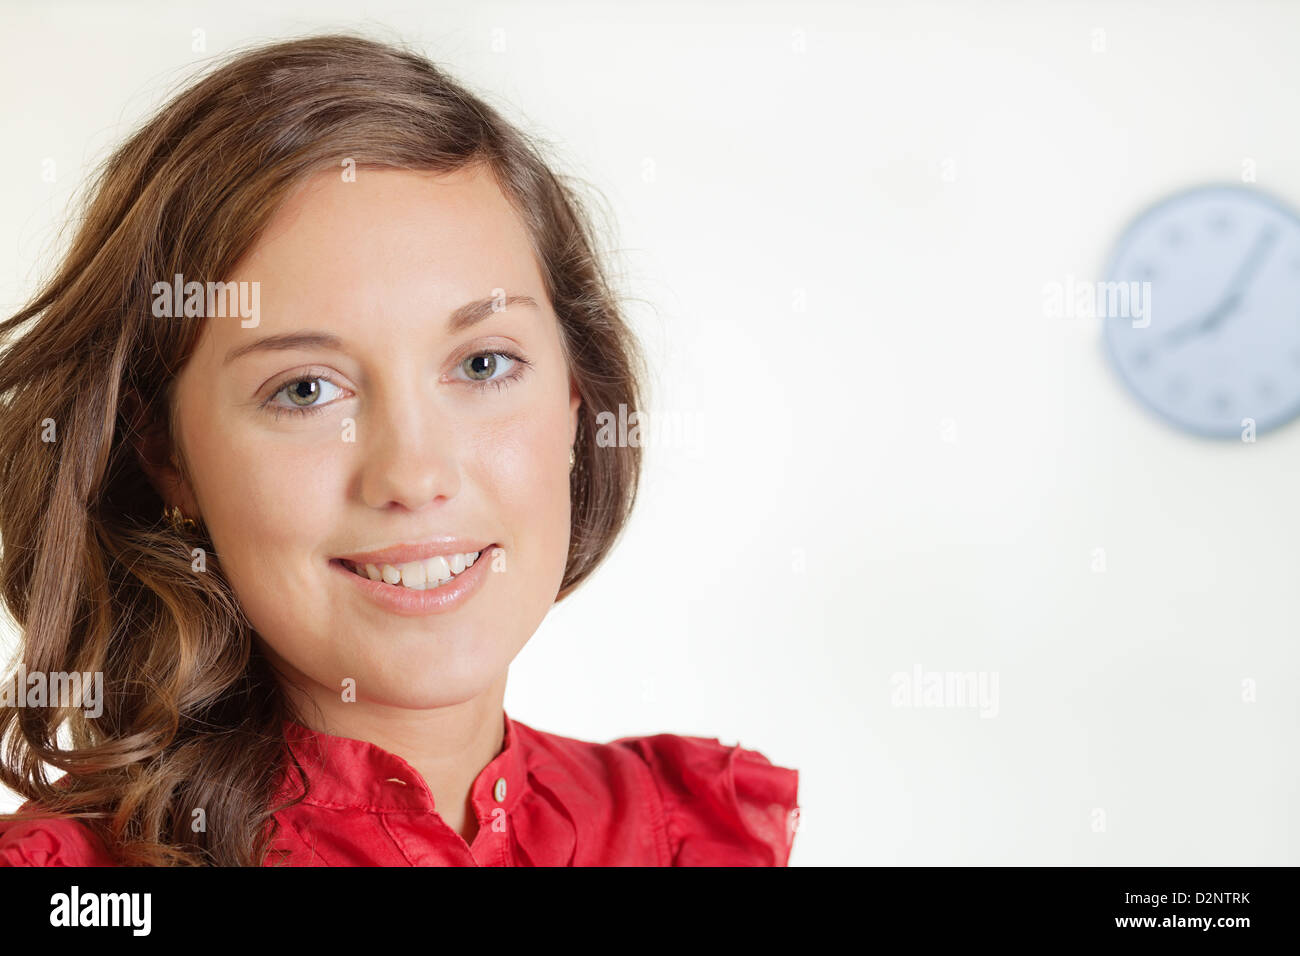 Portrait of pretty young blond woman in red dress Stock Photo